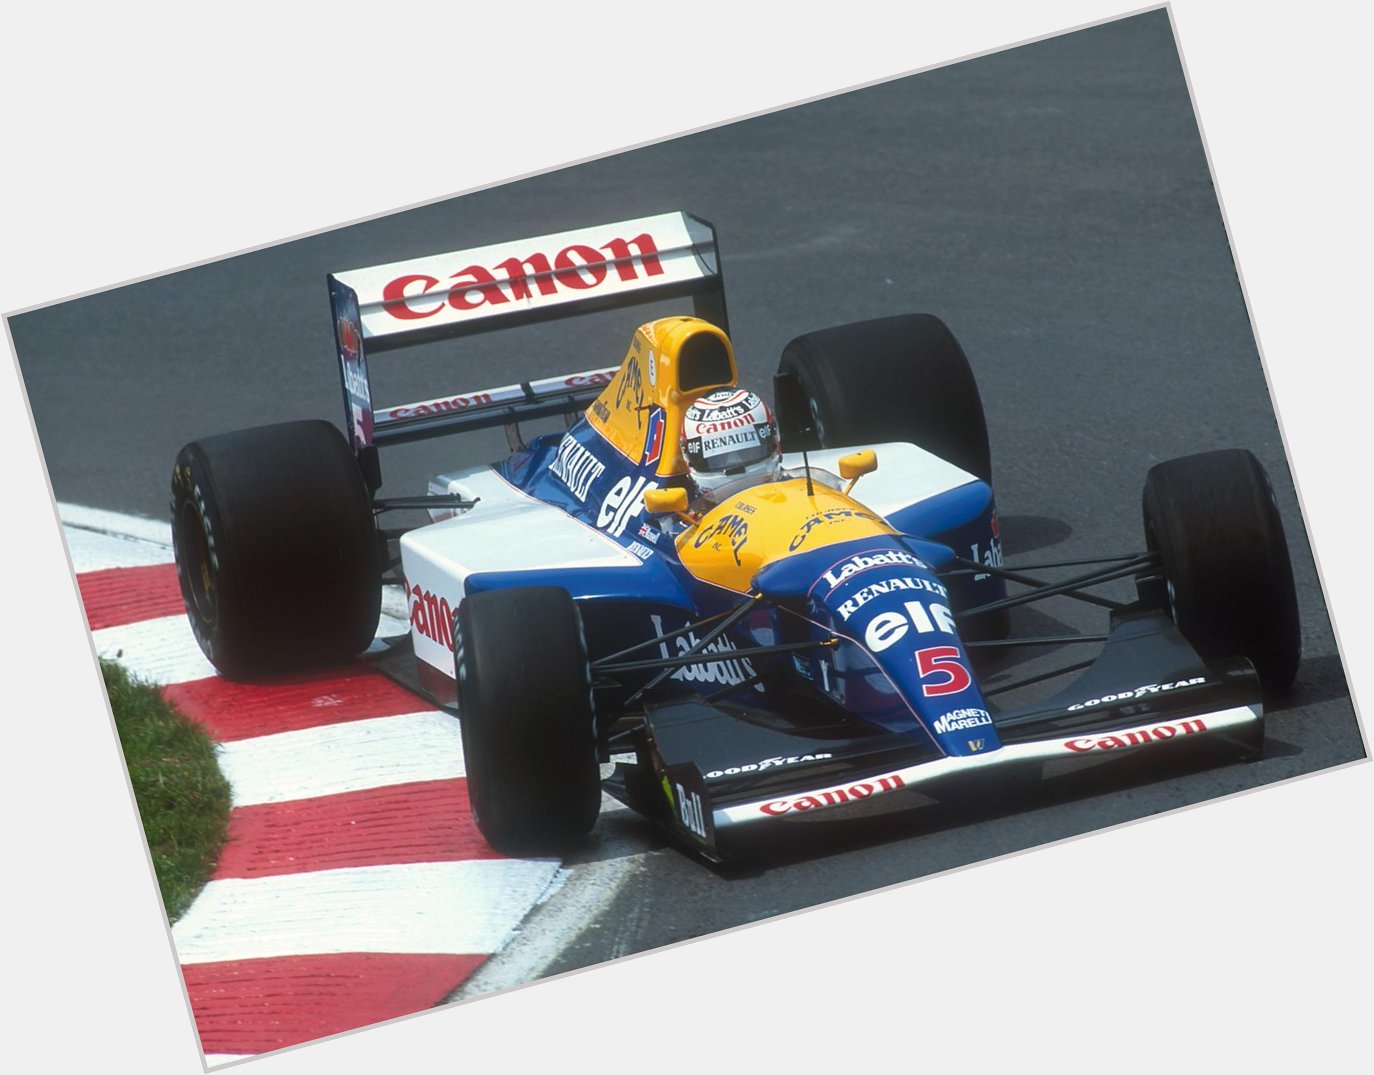 Happy Birthday Nigel From our British edition, Nigel Mansell, 62 today:  